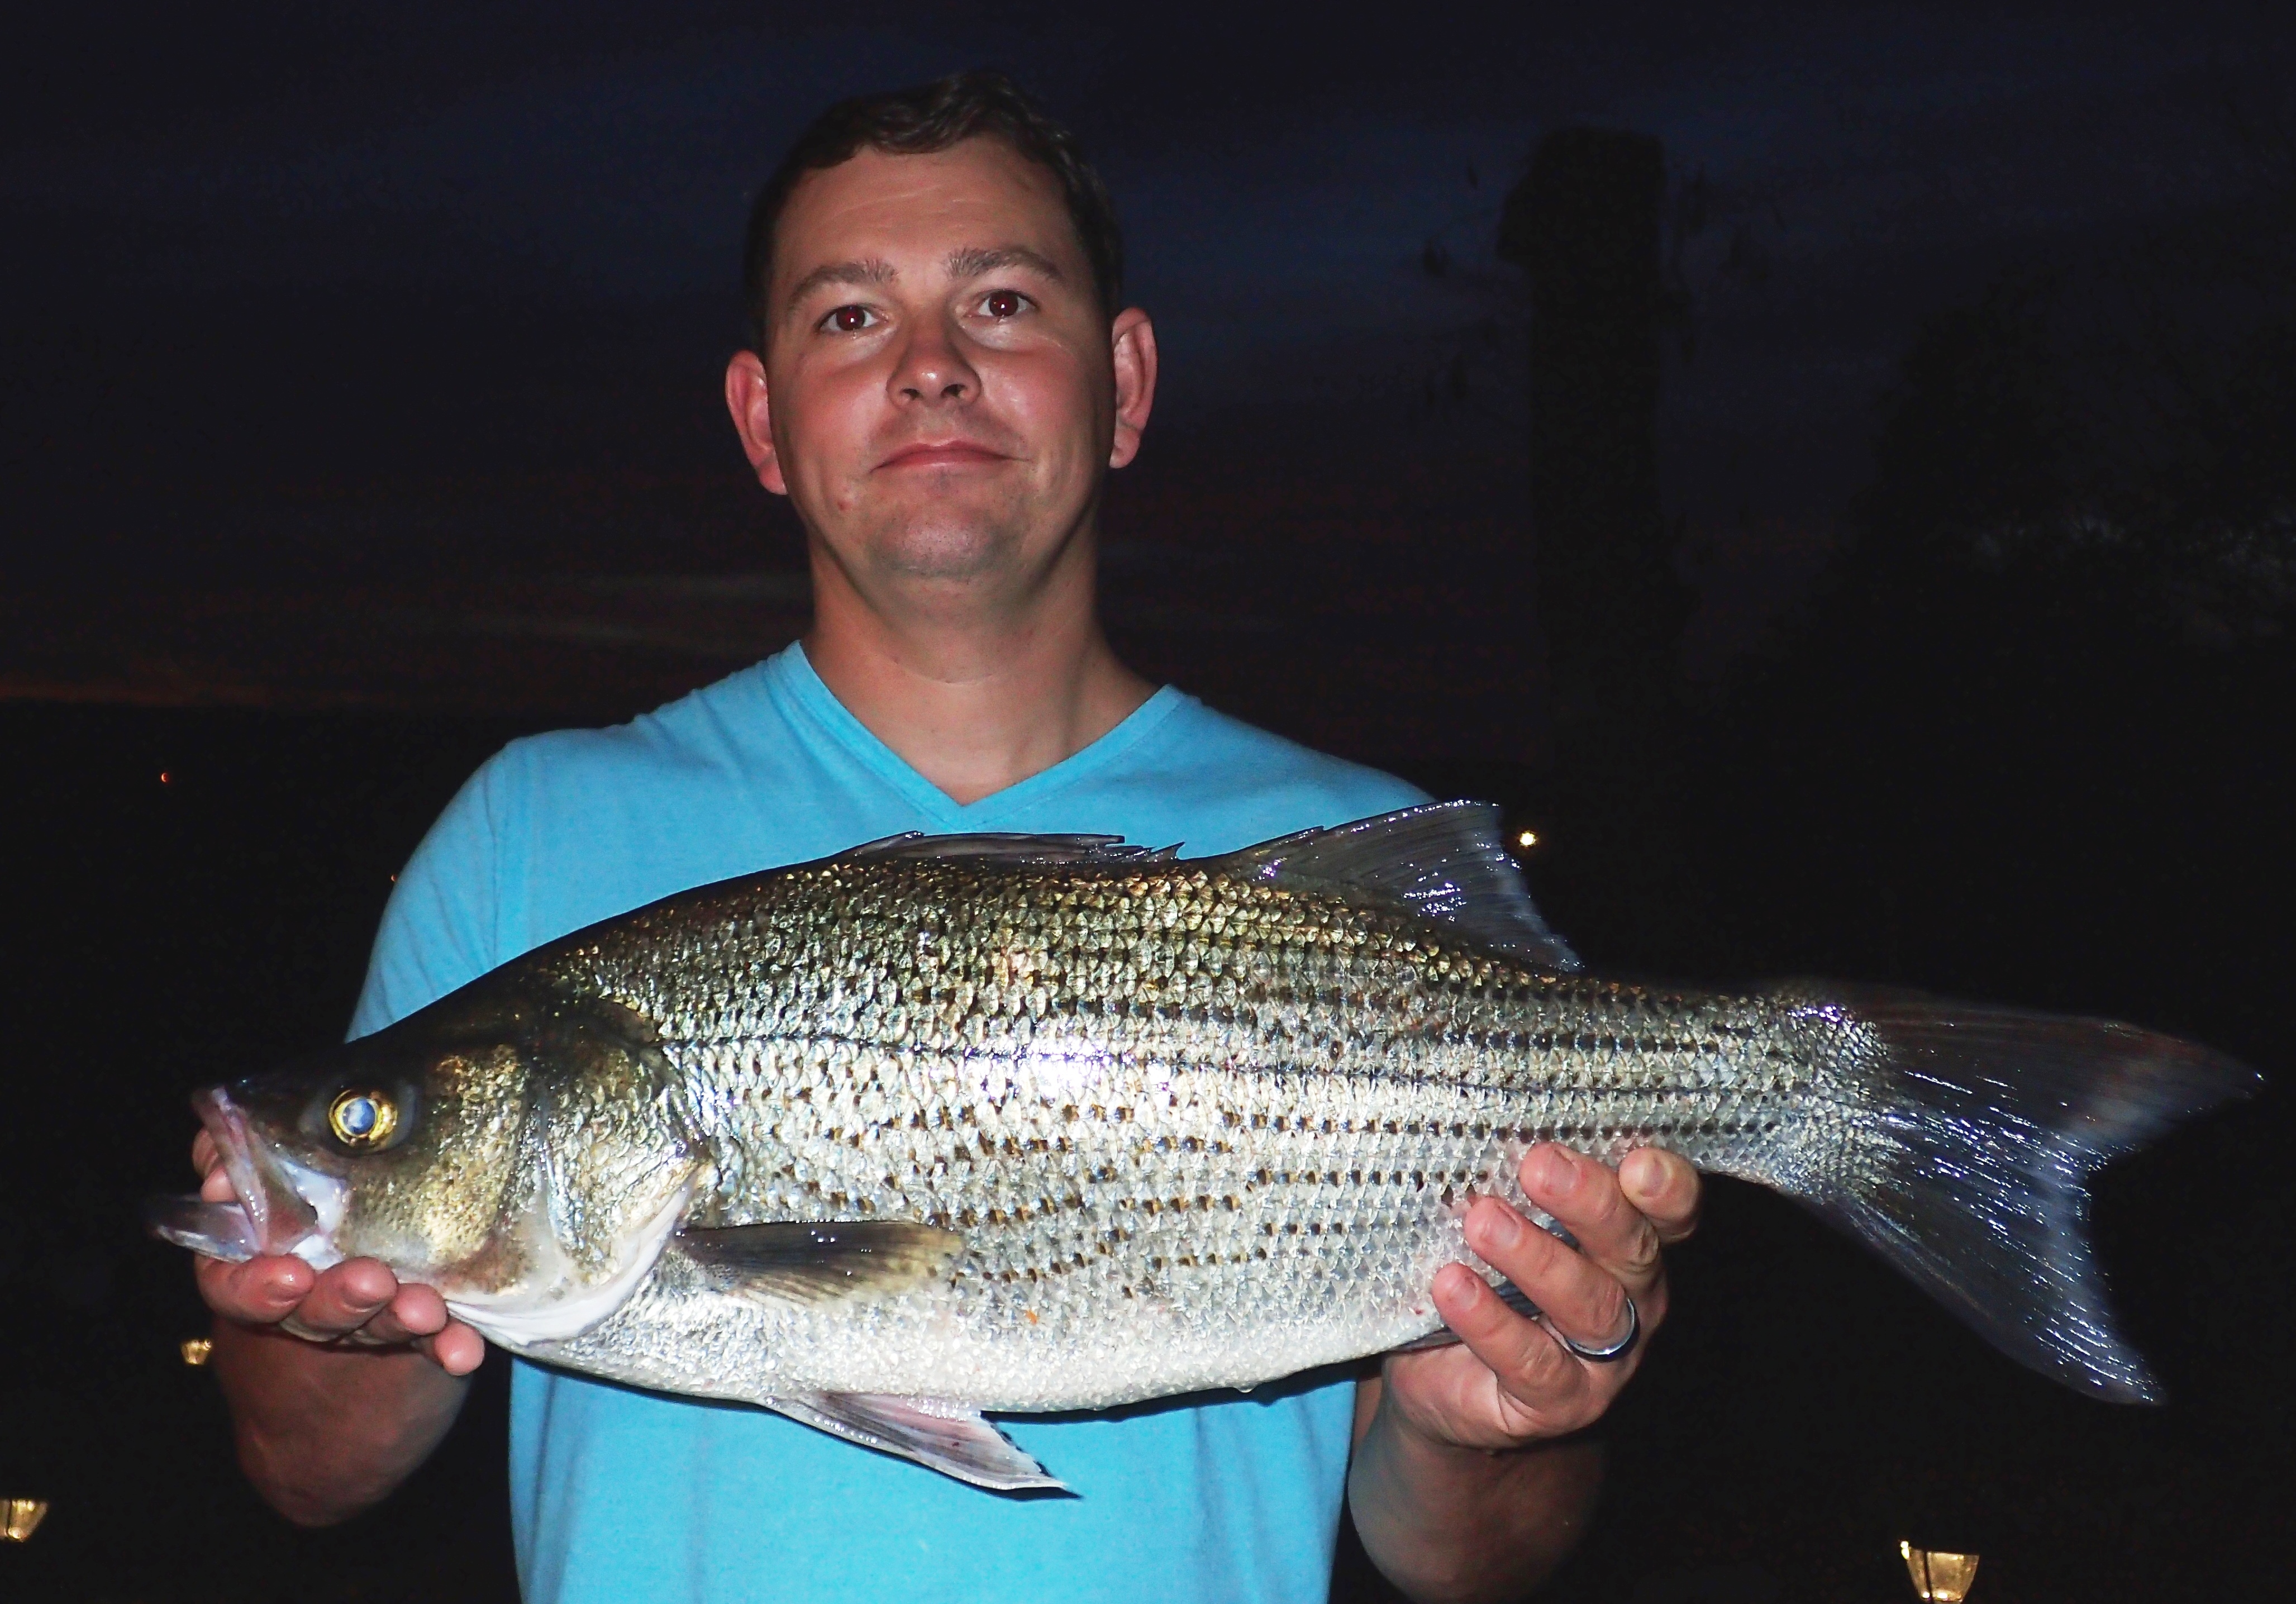 Mark McArtor with his state record hybrid striped bass.